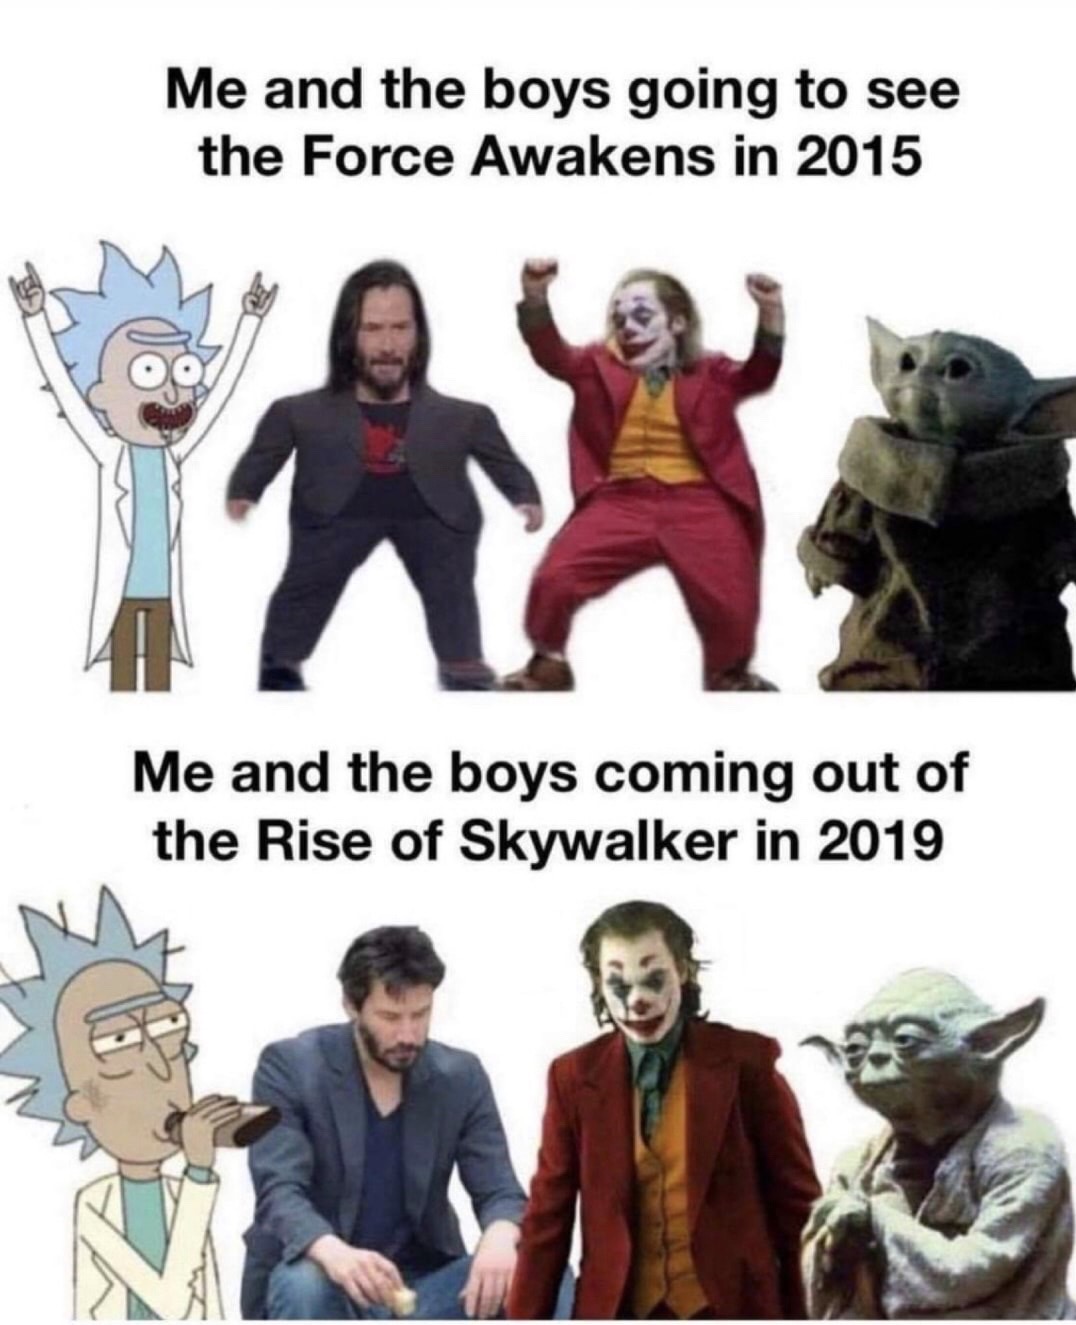 me and the boys meme - Me and the boys going to see the Force Awakens in 2015 Me and the boys coming out of the Rise of Skywalker in 2019